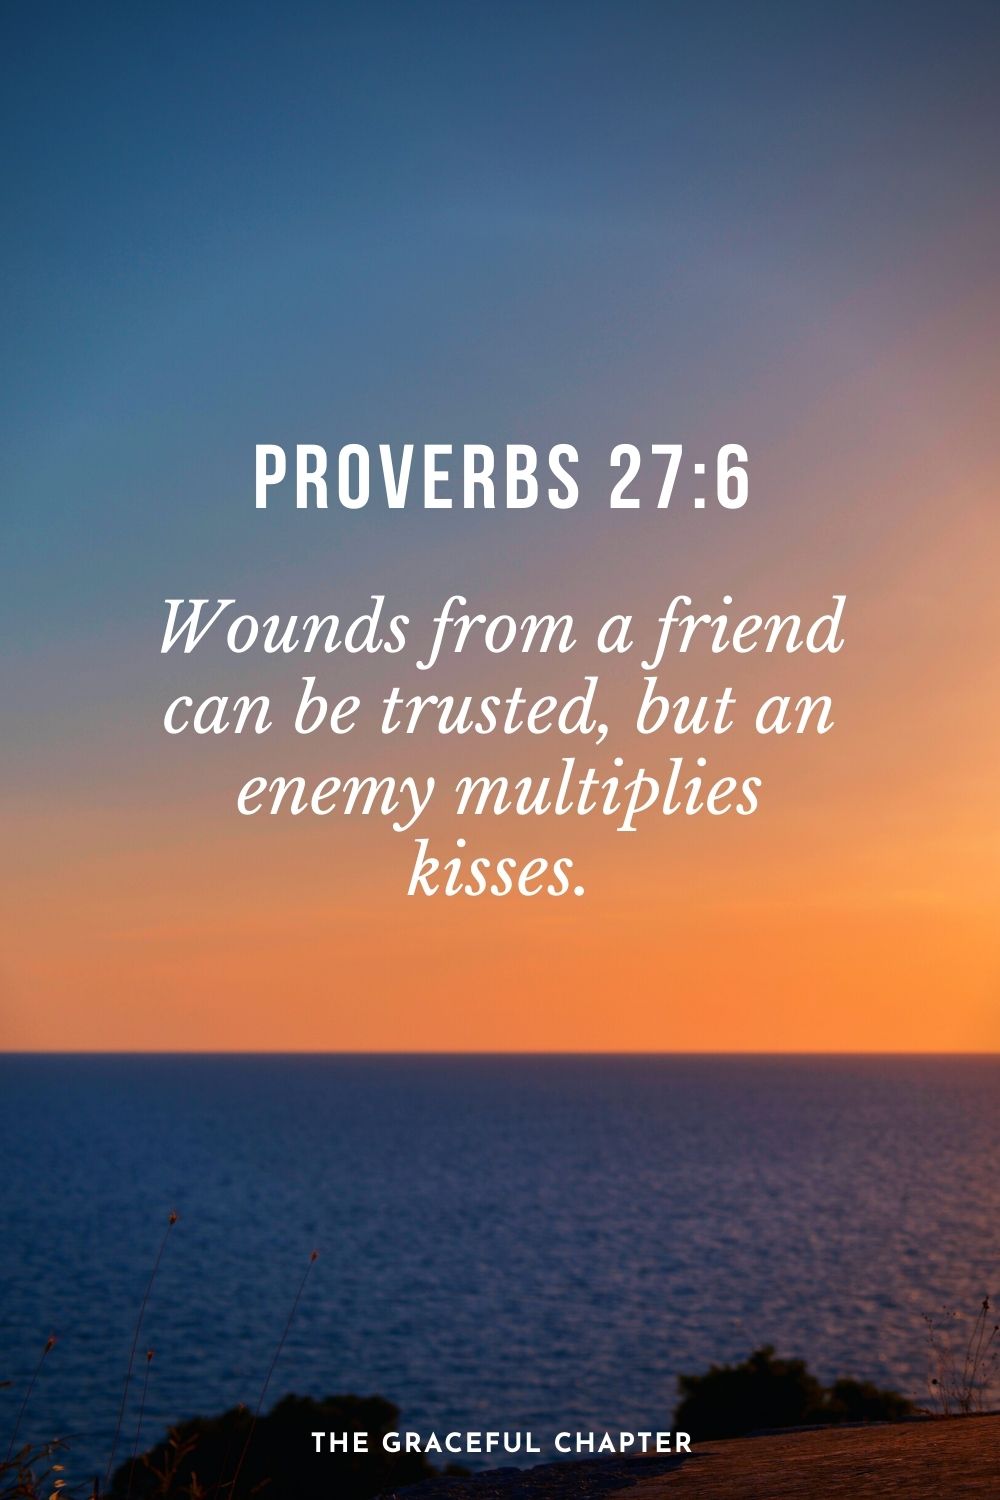 Wounds from a friend can be trusted, but an enemy multiplies kisses. Proverbs 27:6